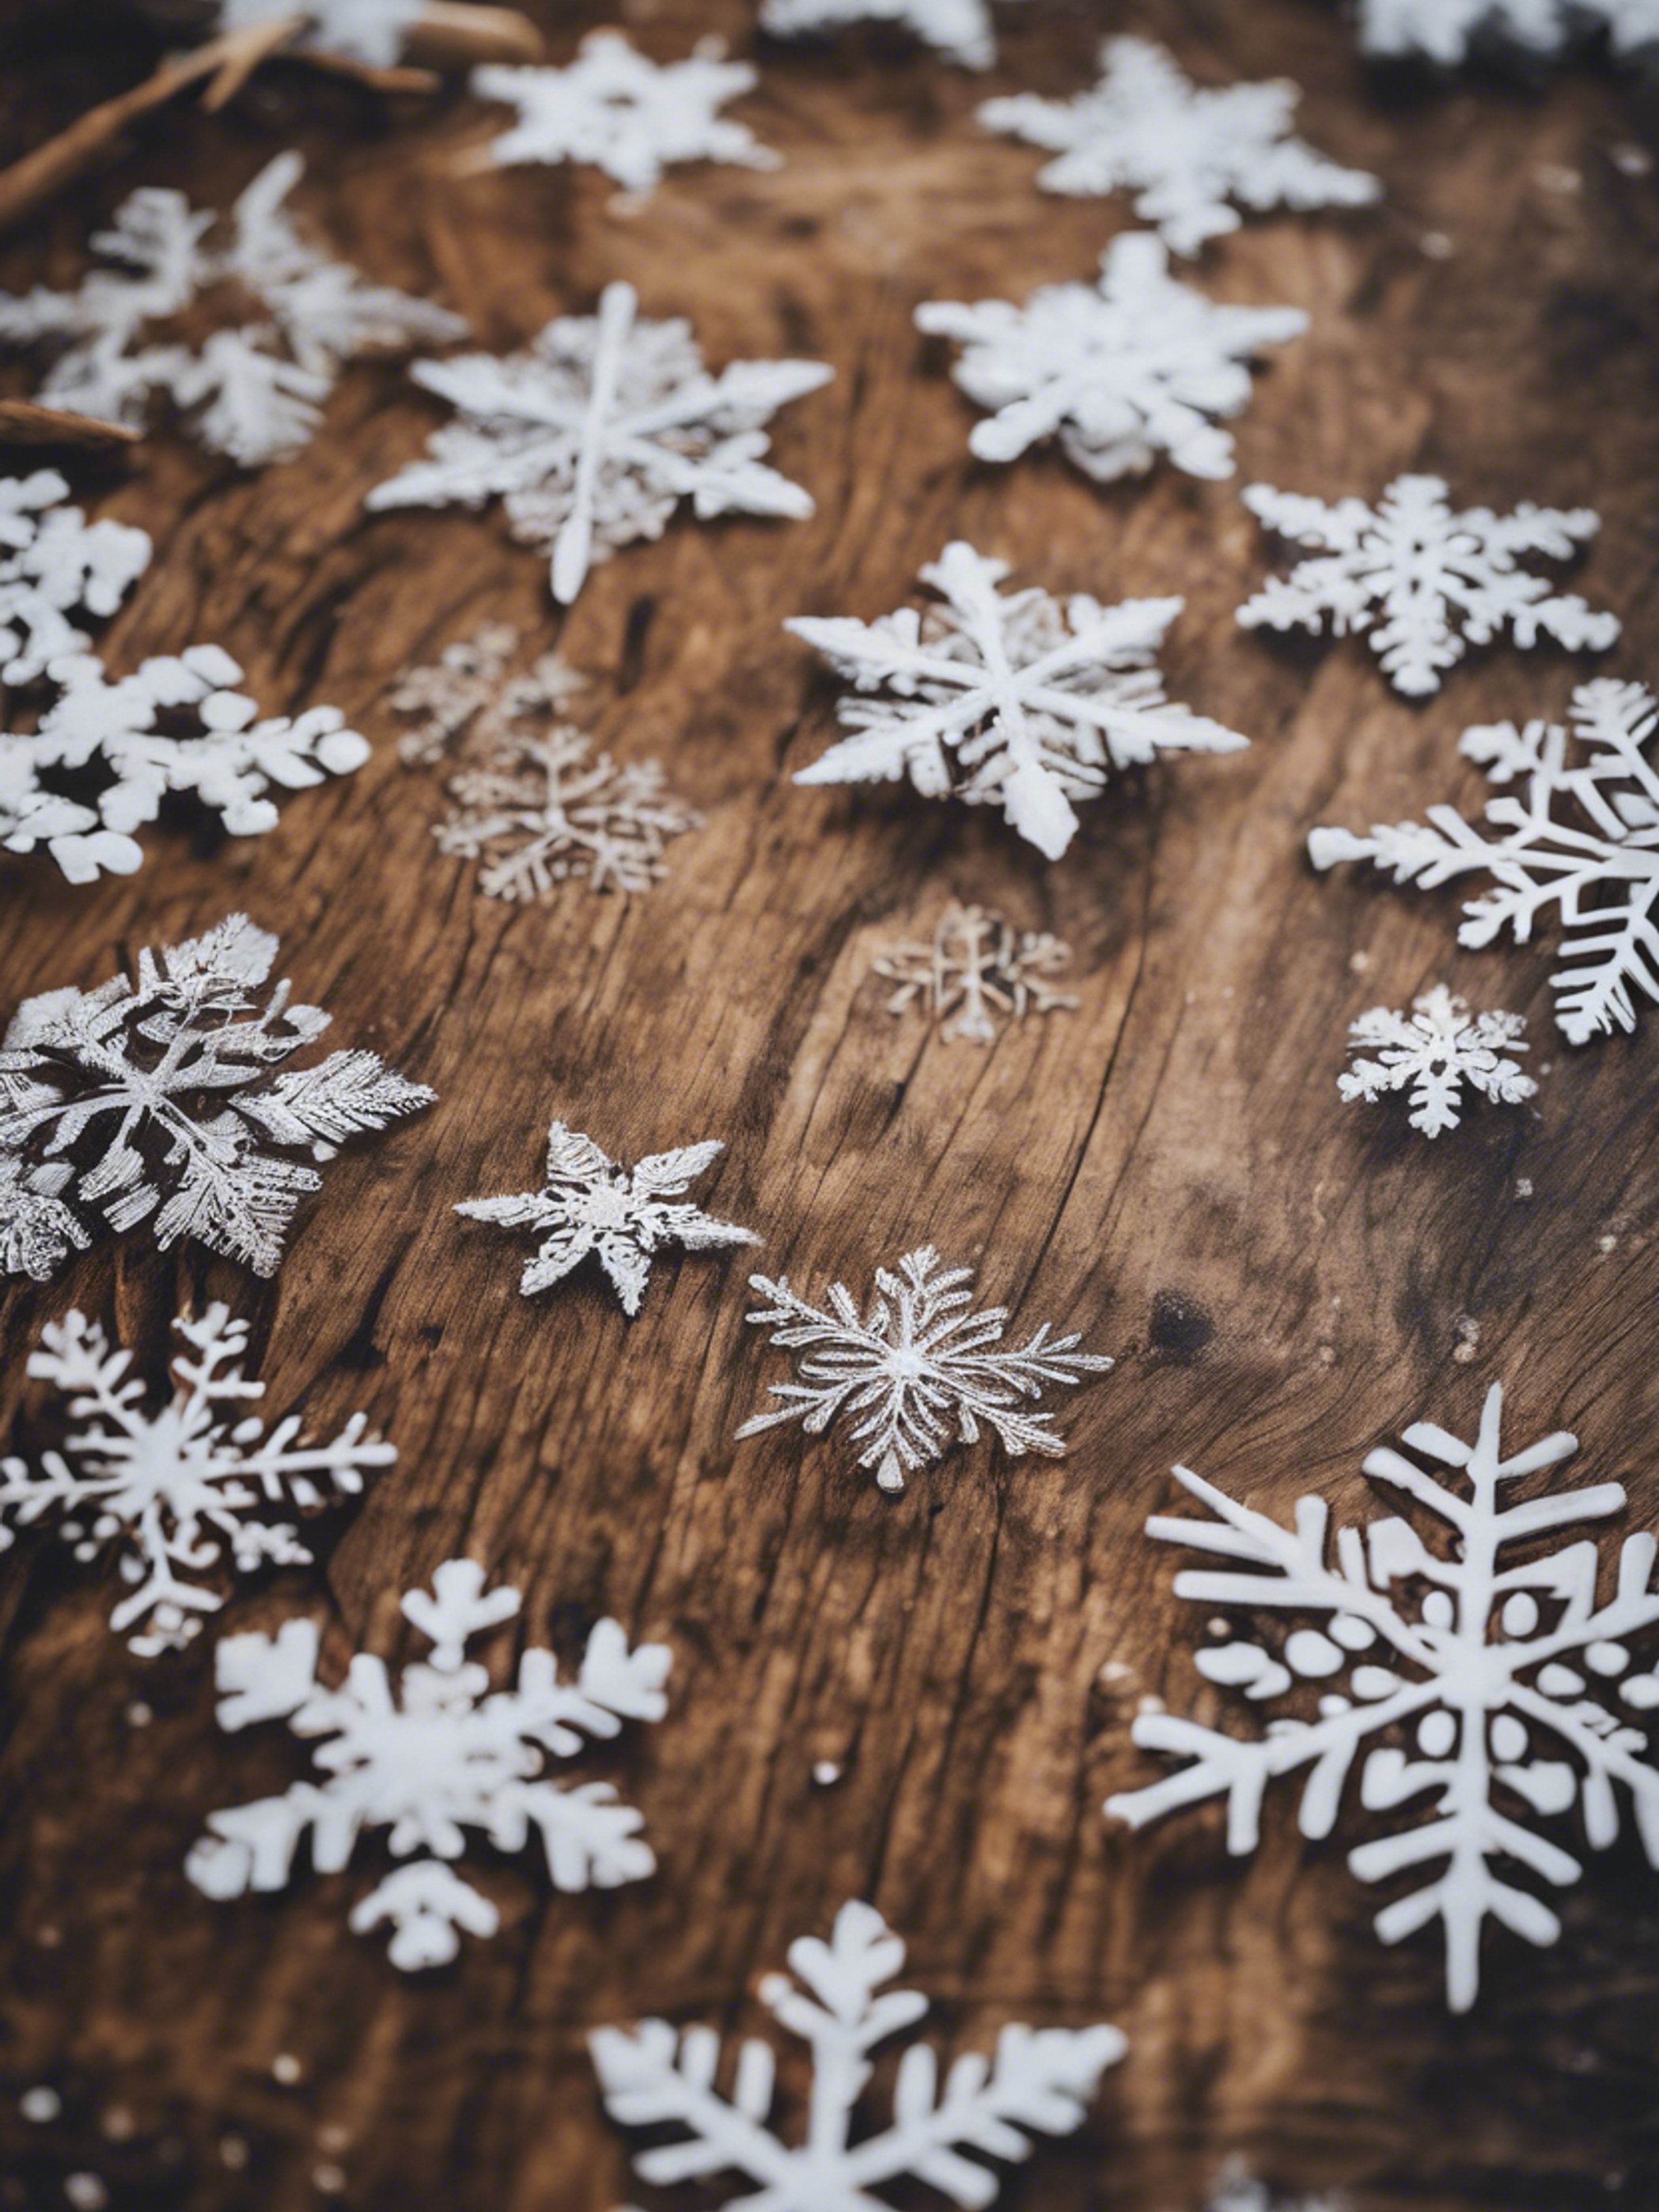 Snowflakes creating a beautiful pattern on a wooden tabletop. Wallpaper[7d0fdac325ca414bb9ff]